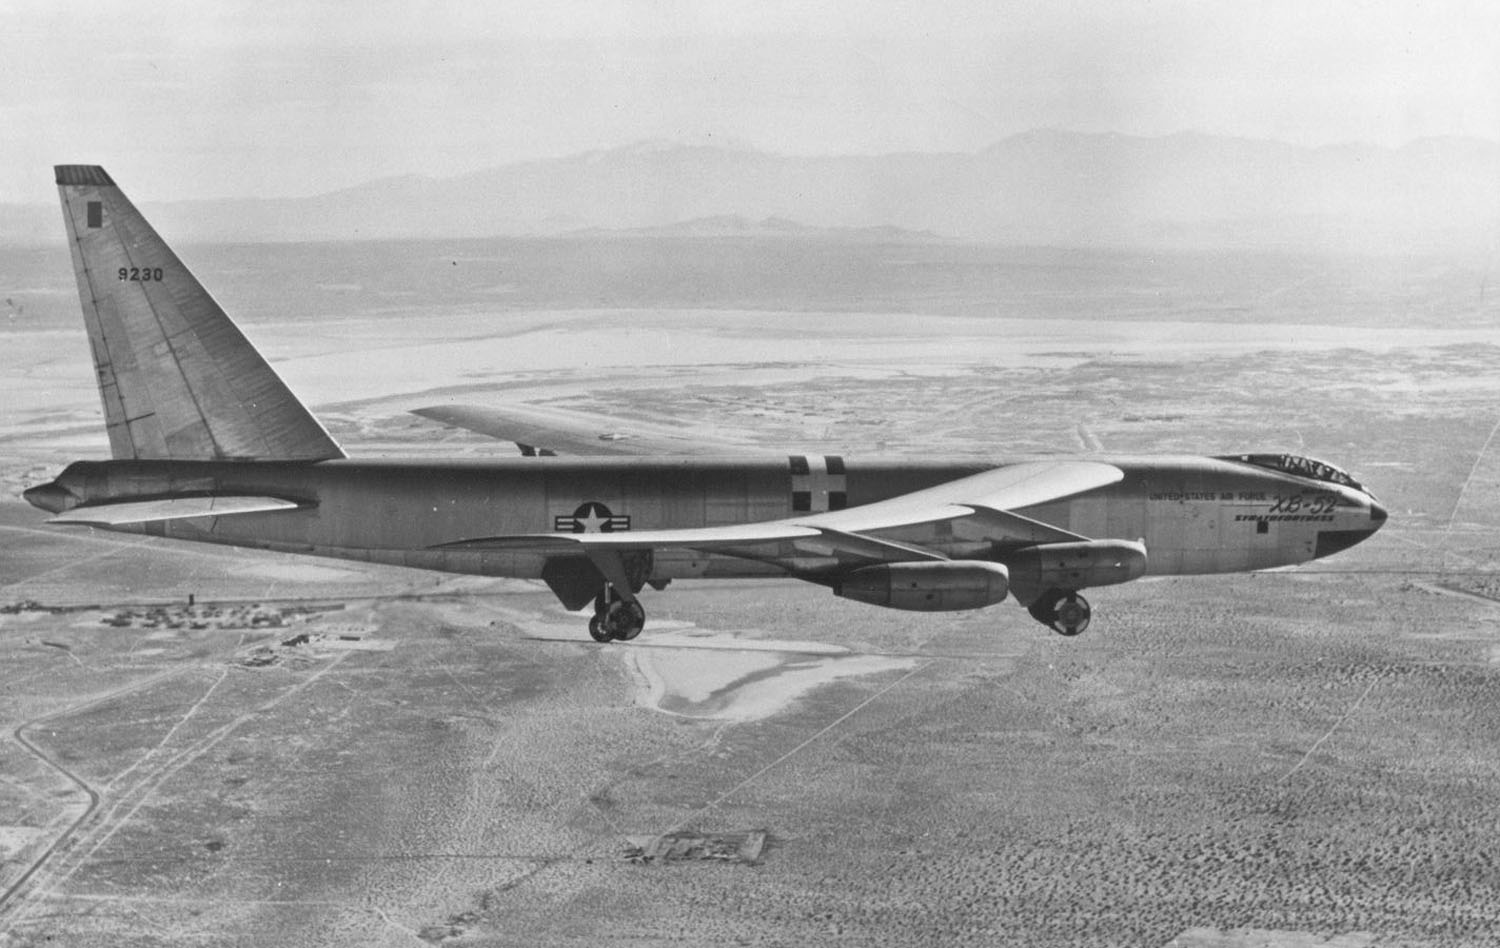 Boeing XB-52 Stratofortress 49-230. (U.S. Air Force)